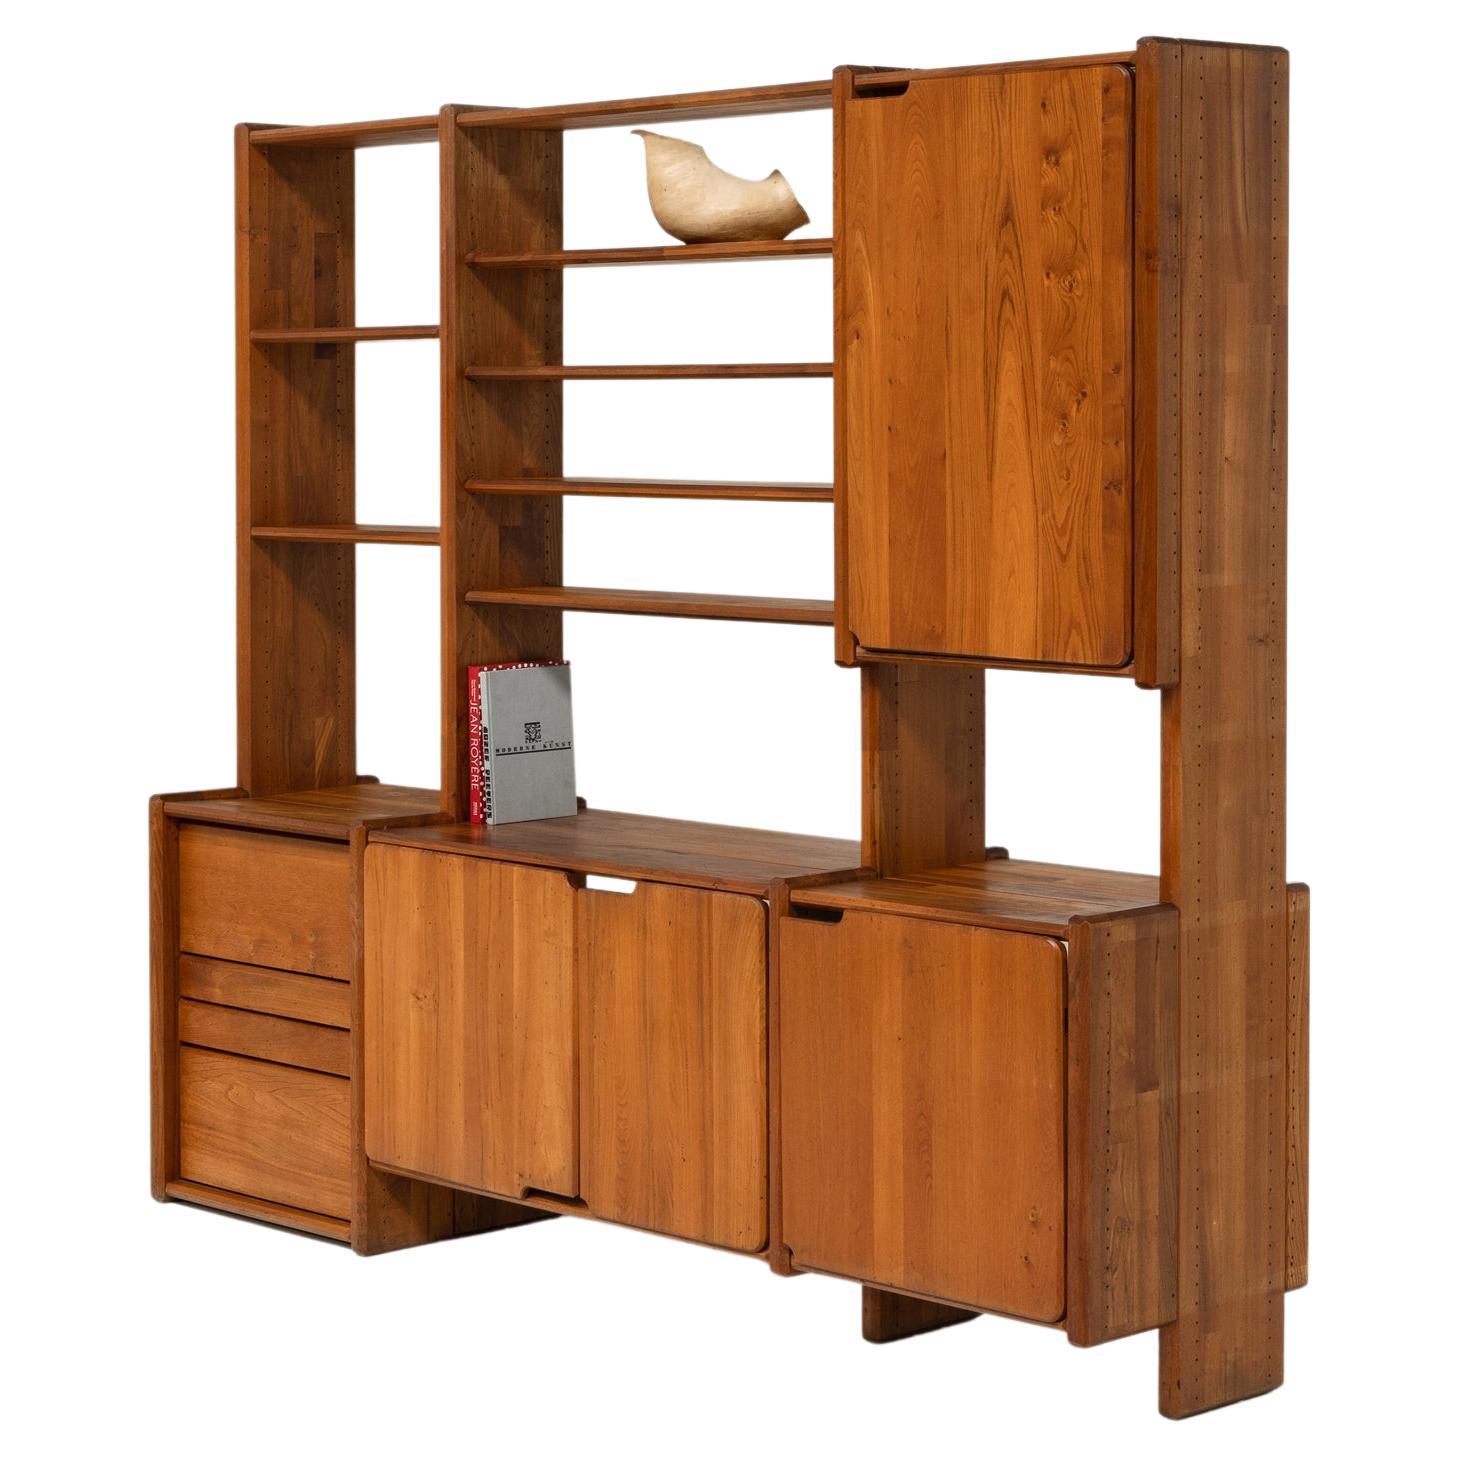 Pierre Chapo Book Case in Solid Elm, Shelves, French, Mid-Century Modern, 1970's